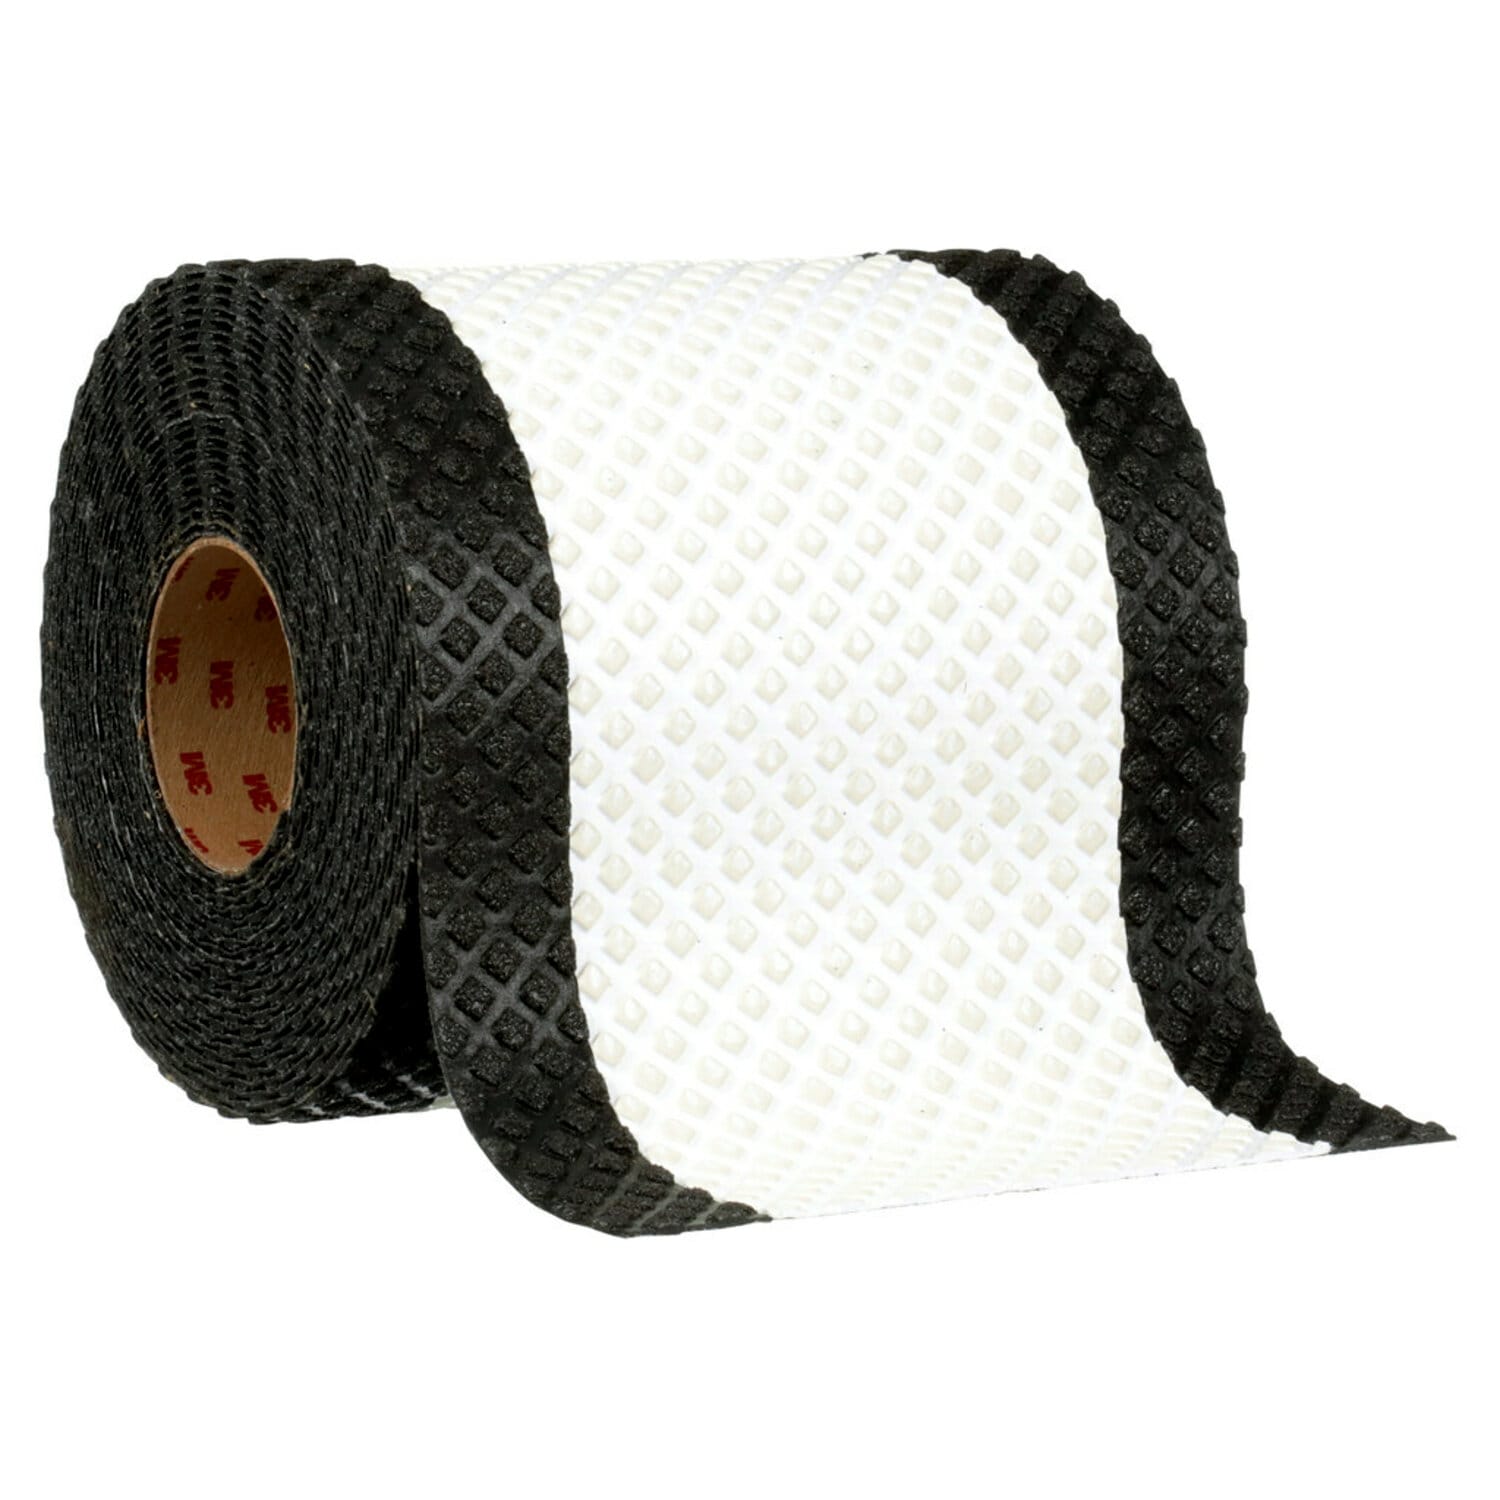 7010344015 - 3M Stamark High Performance Contrast Tape A380AW-5 White/Black,
Net, 11 in x 50 yd, 8 in with 1.5 in borders